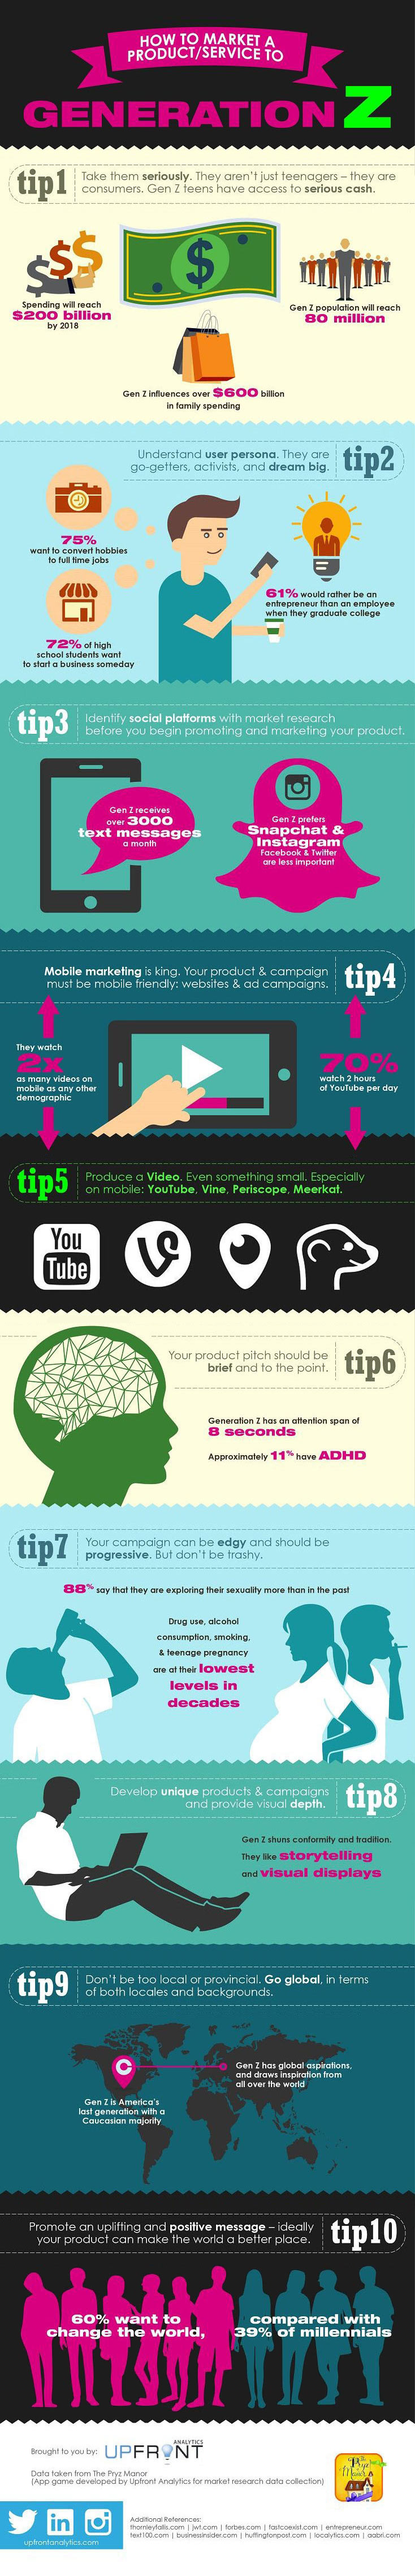 How to Market to Generation Z Infographic